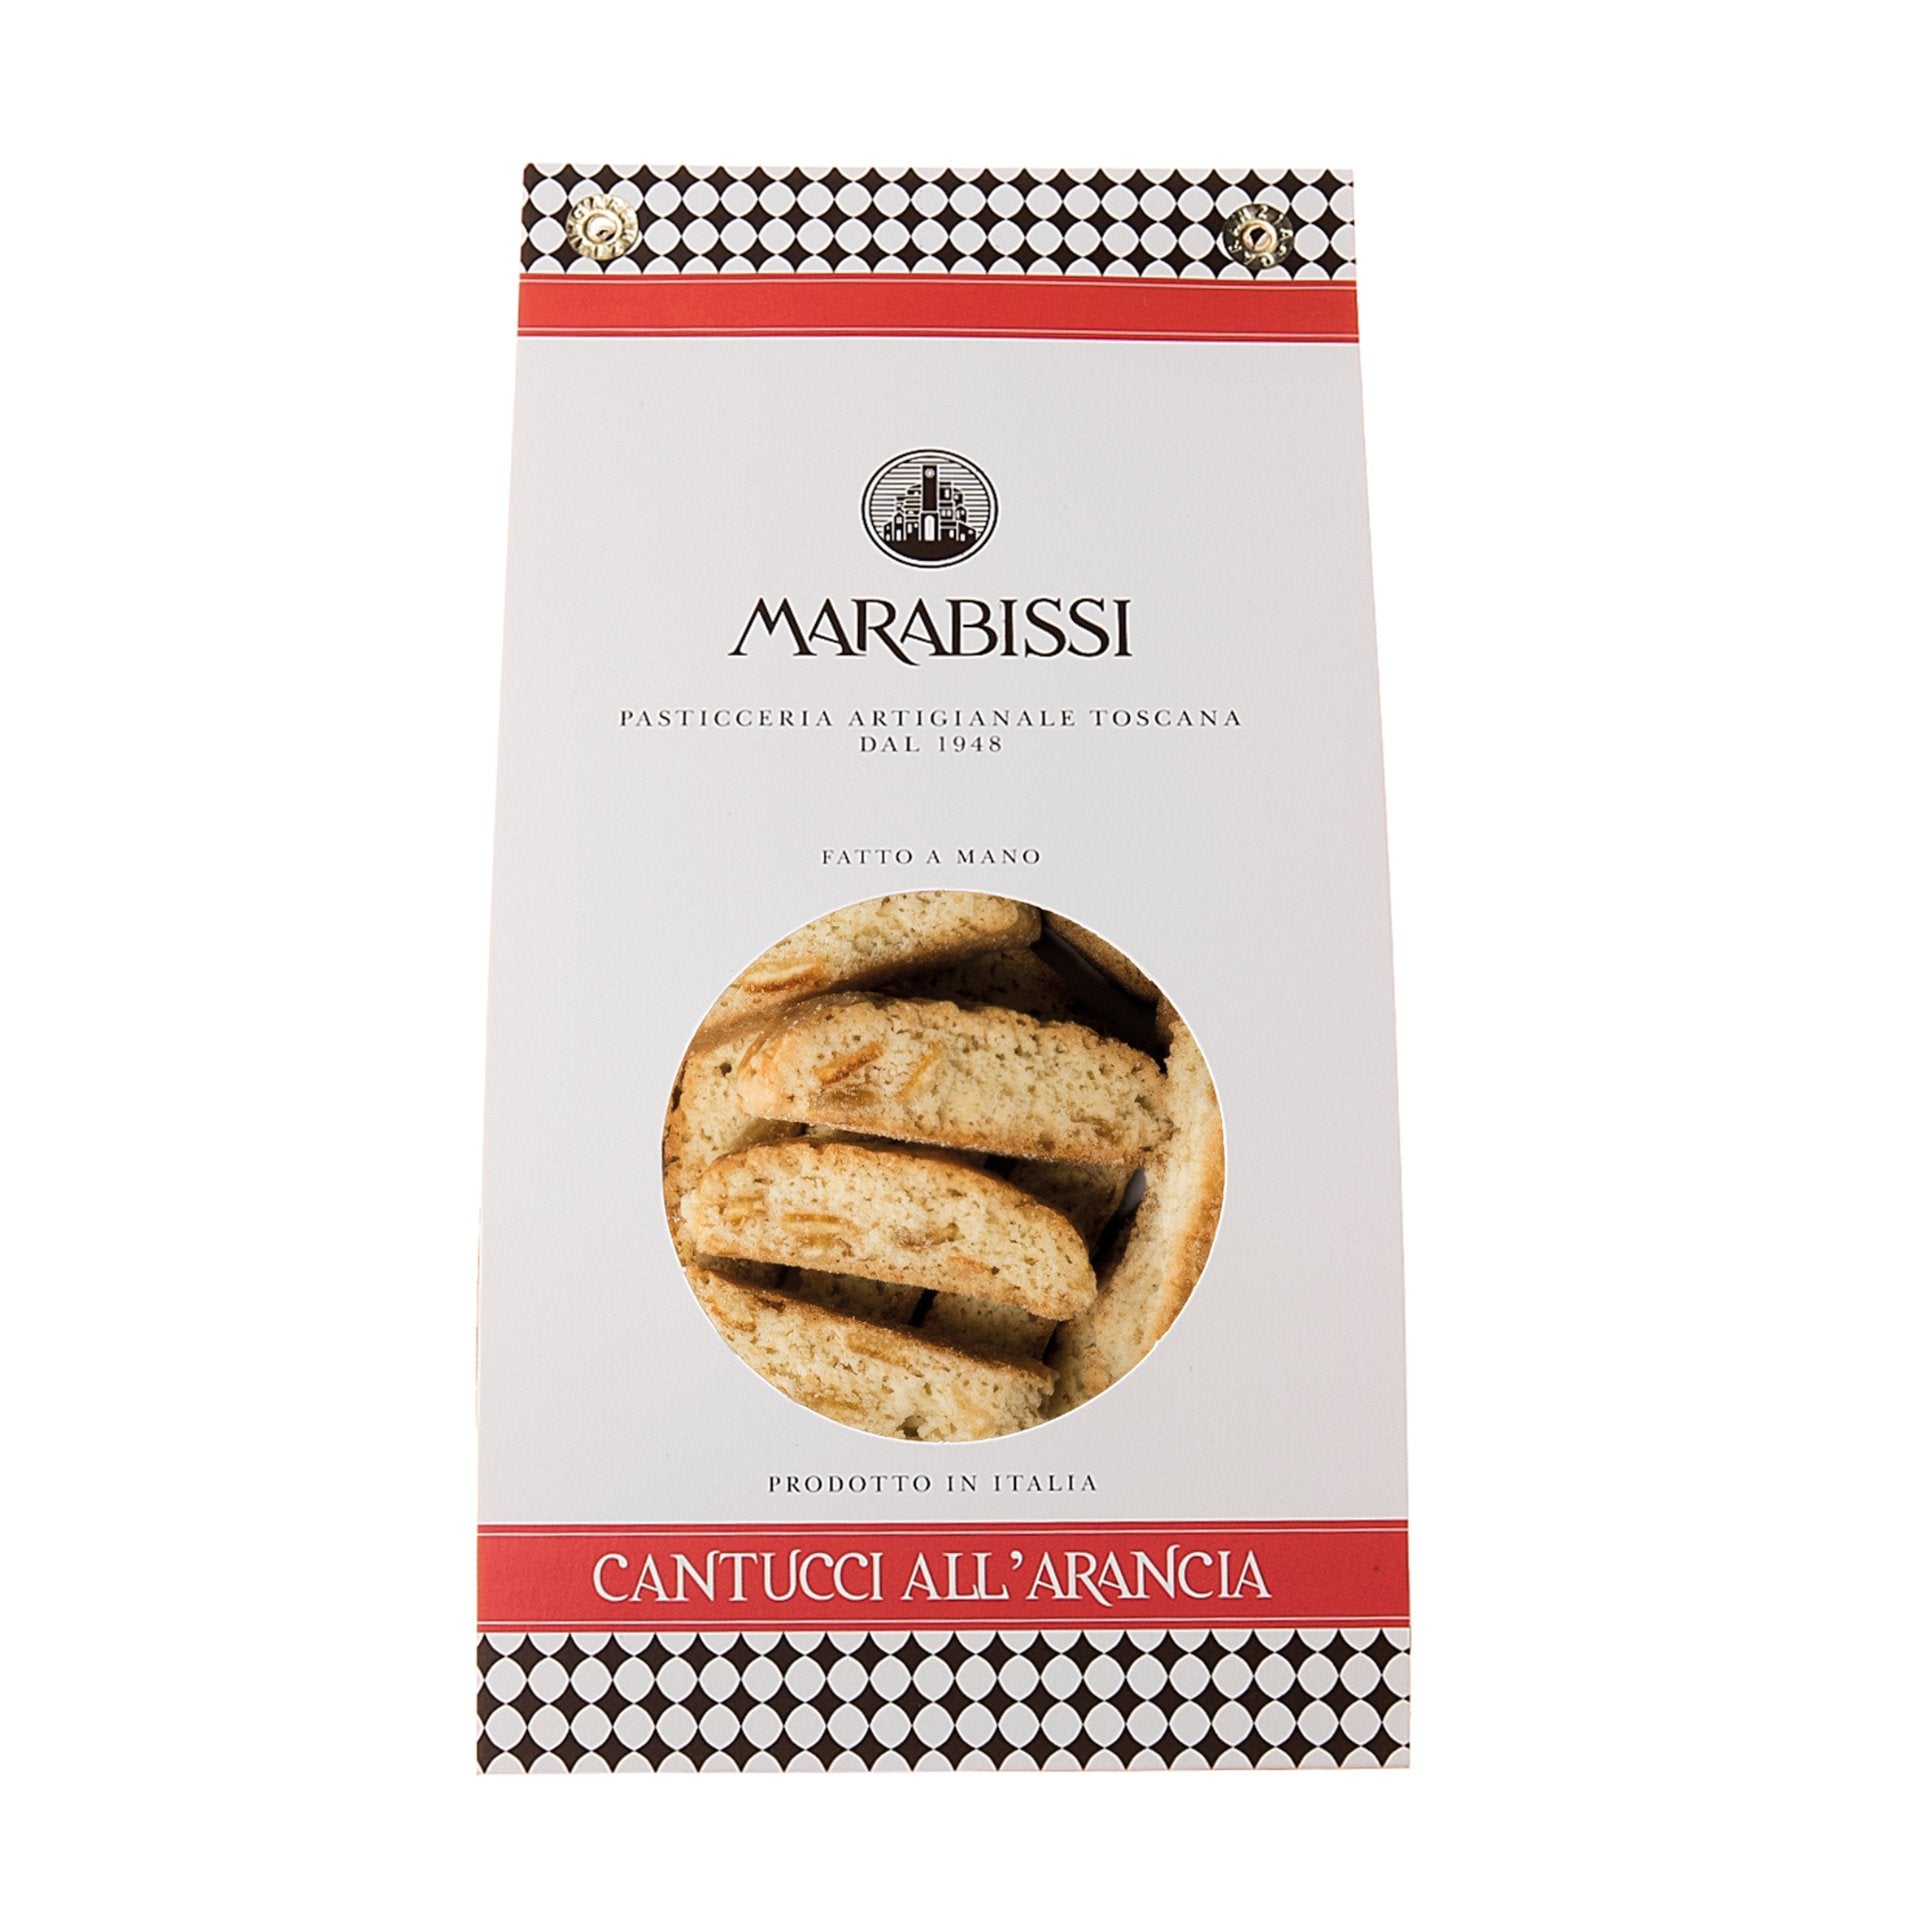 Marabissi Orange Cantucci (White Bag) 200g  | Imported and distributed in the UK by Just Gourmet Foods